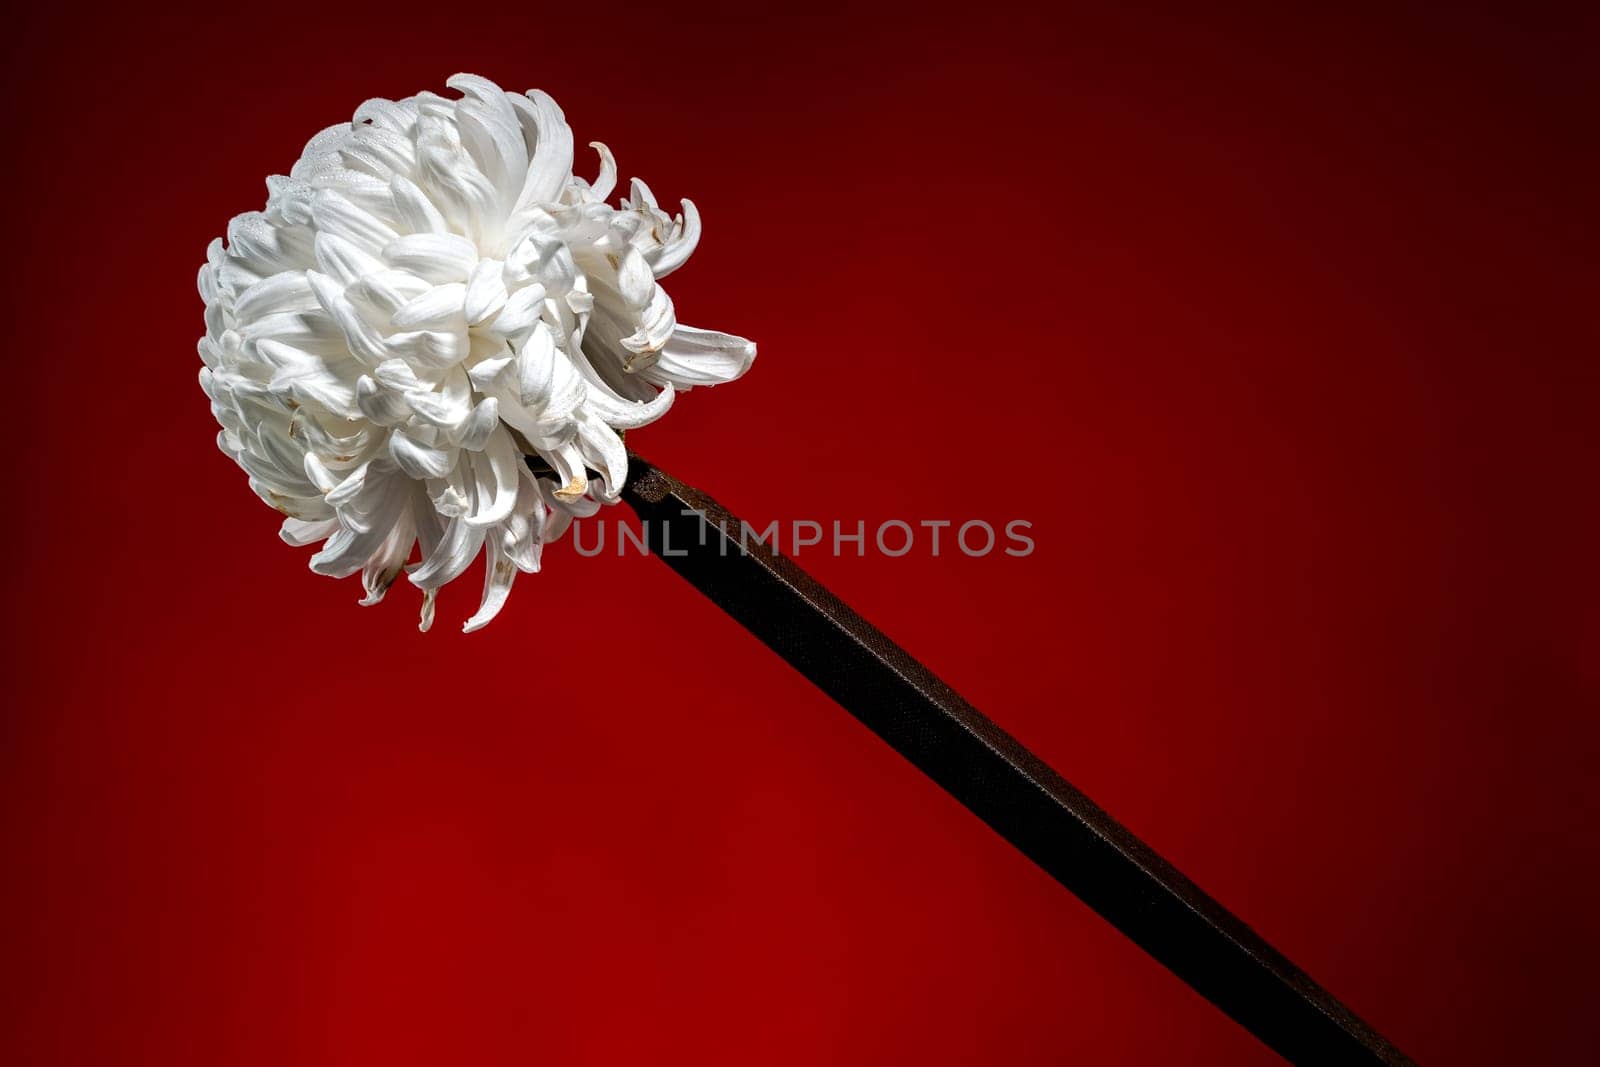 Creative still life with old rusty rasp file with white chrysanthemum flower head on a red background